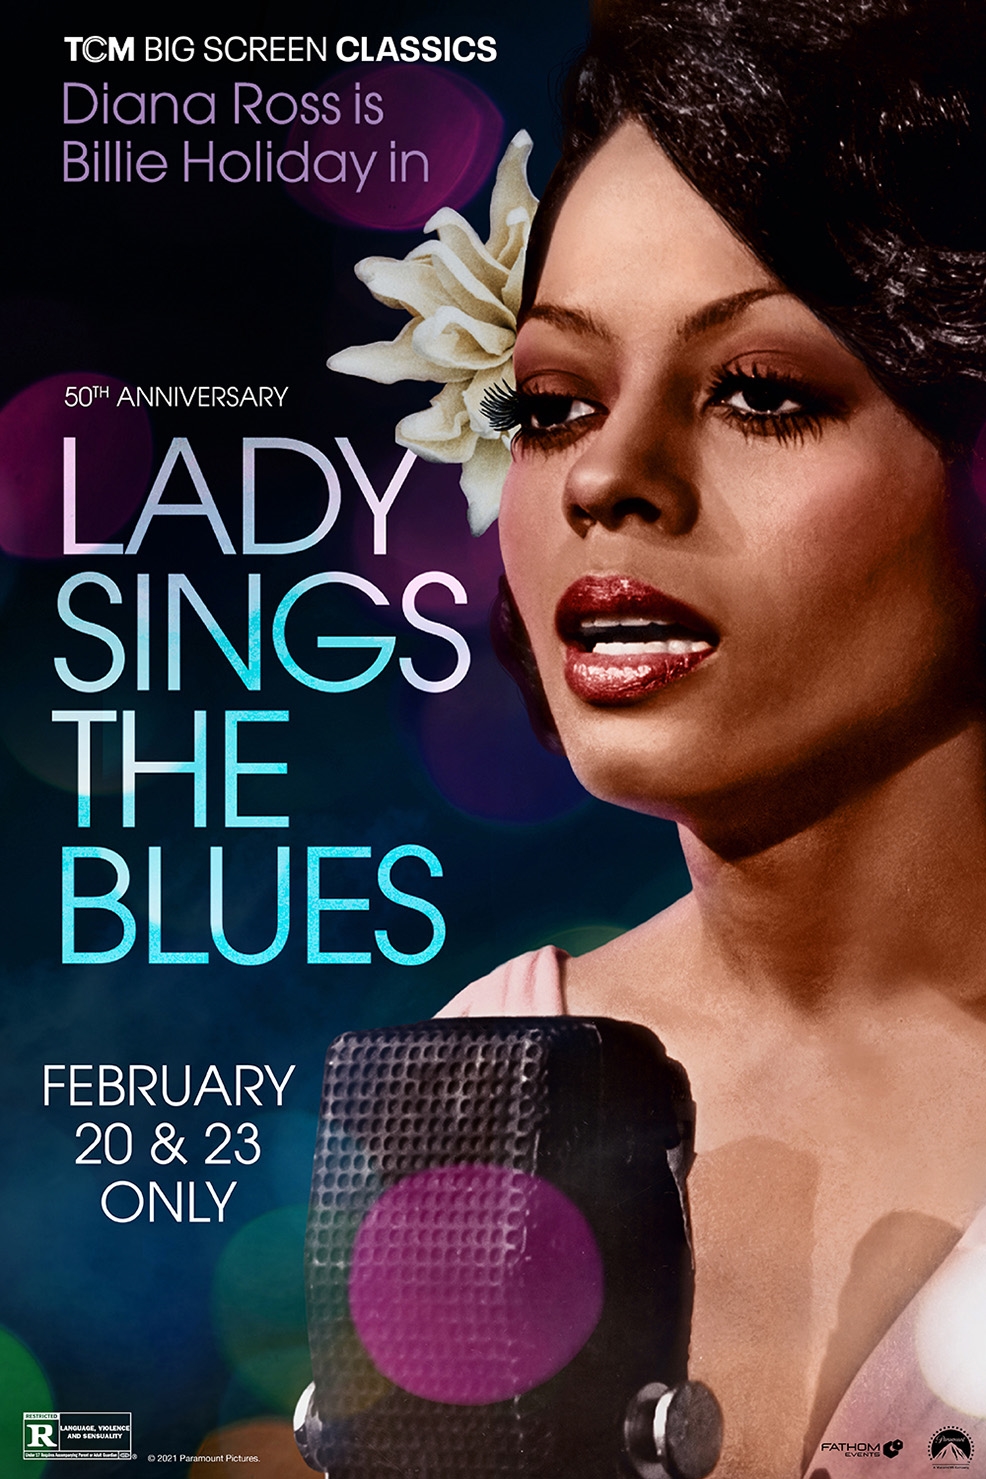 Poster of Lady Sings the Blues 50th Anniversary presented by TCM